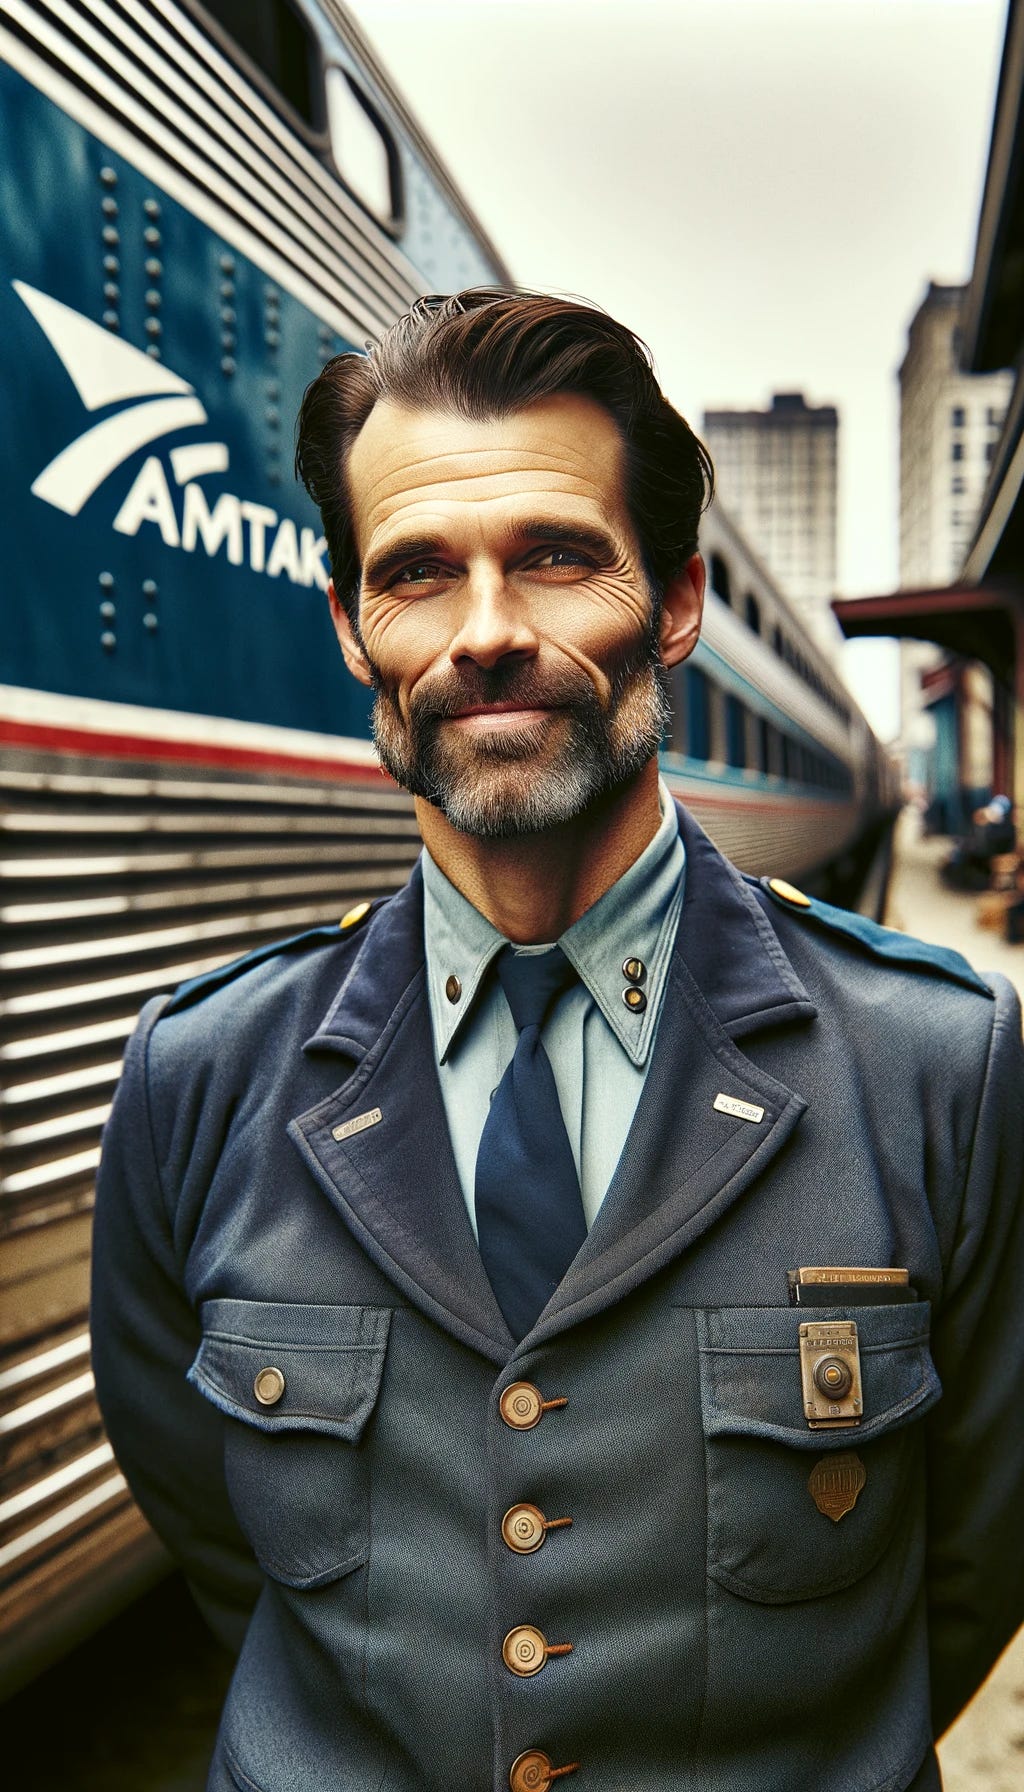 A rugged, blue-collar Amtrak train conductor named Johnny, embodying a tough but kind-hearted persona. He has a strong build, a friendly face, and is dressed in a traditional conductor's uniform. His expression is kind and welcoming, reflecting his heart of gold. He's standing in front of a train, with elements indicating a Boston setting in the background. The image captures the essence of a hardworking individual with a warm, approachable demeanor, typical of Boston's working-class spirit.